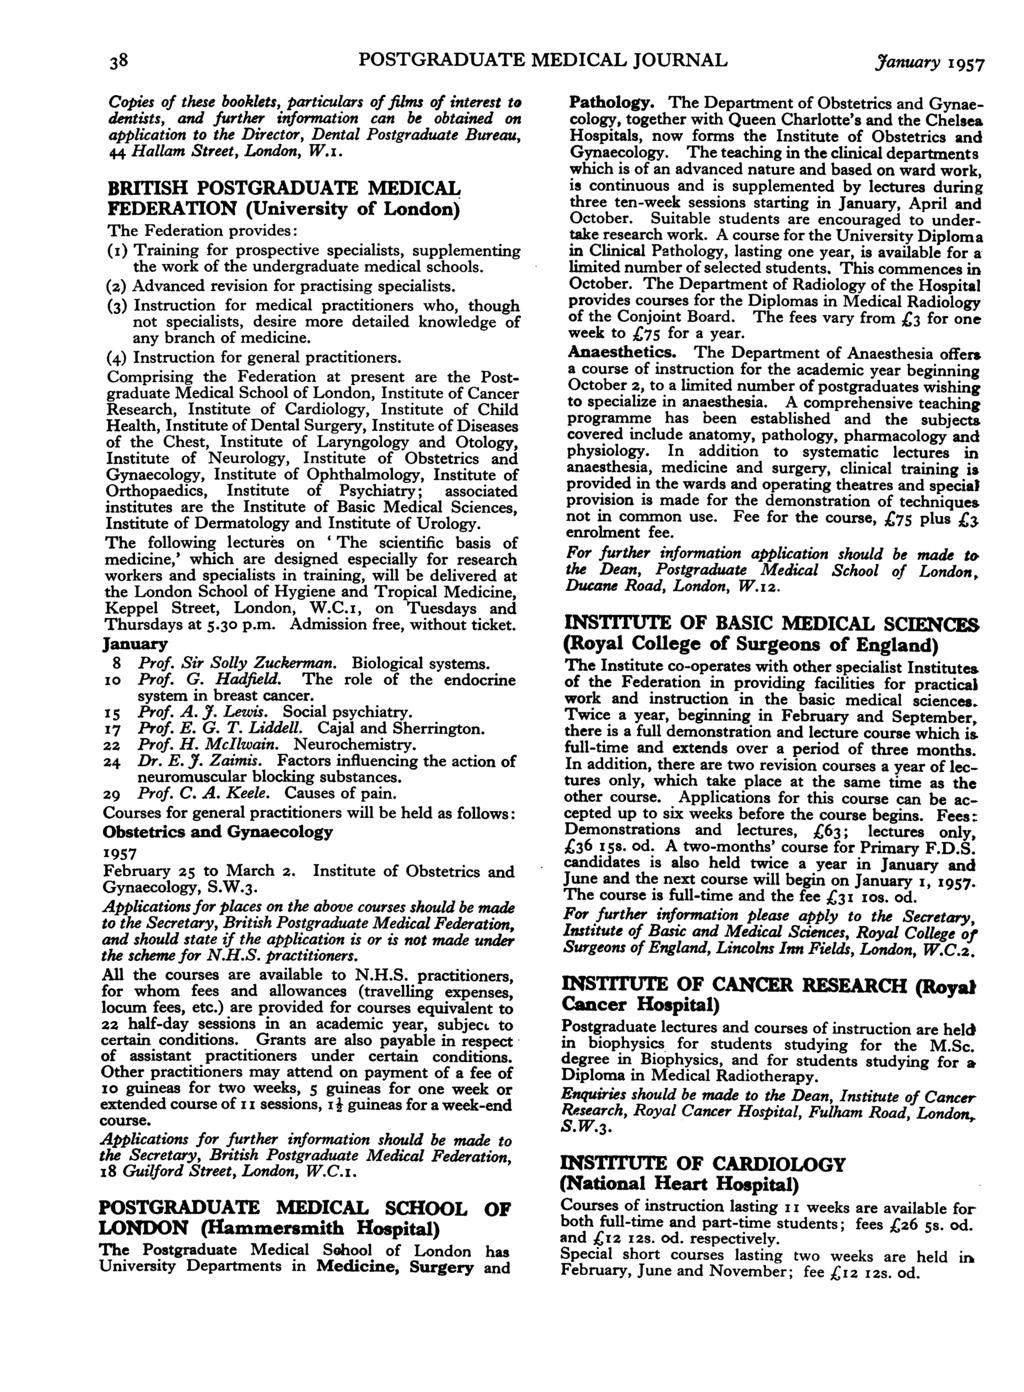 38 POSTGRADUATE MEDICAL JOURNAL January 1957 Copies of these booklets, particulars offilms of interest to dentists, and further information can be obtained on application to the Director, Dental